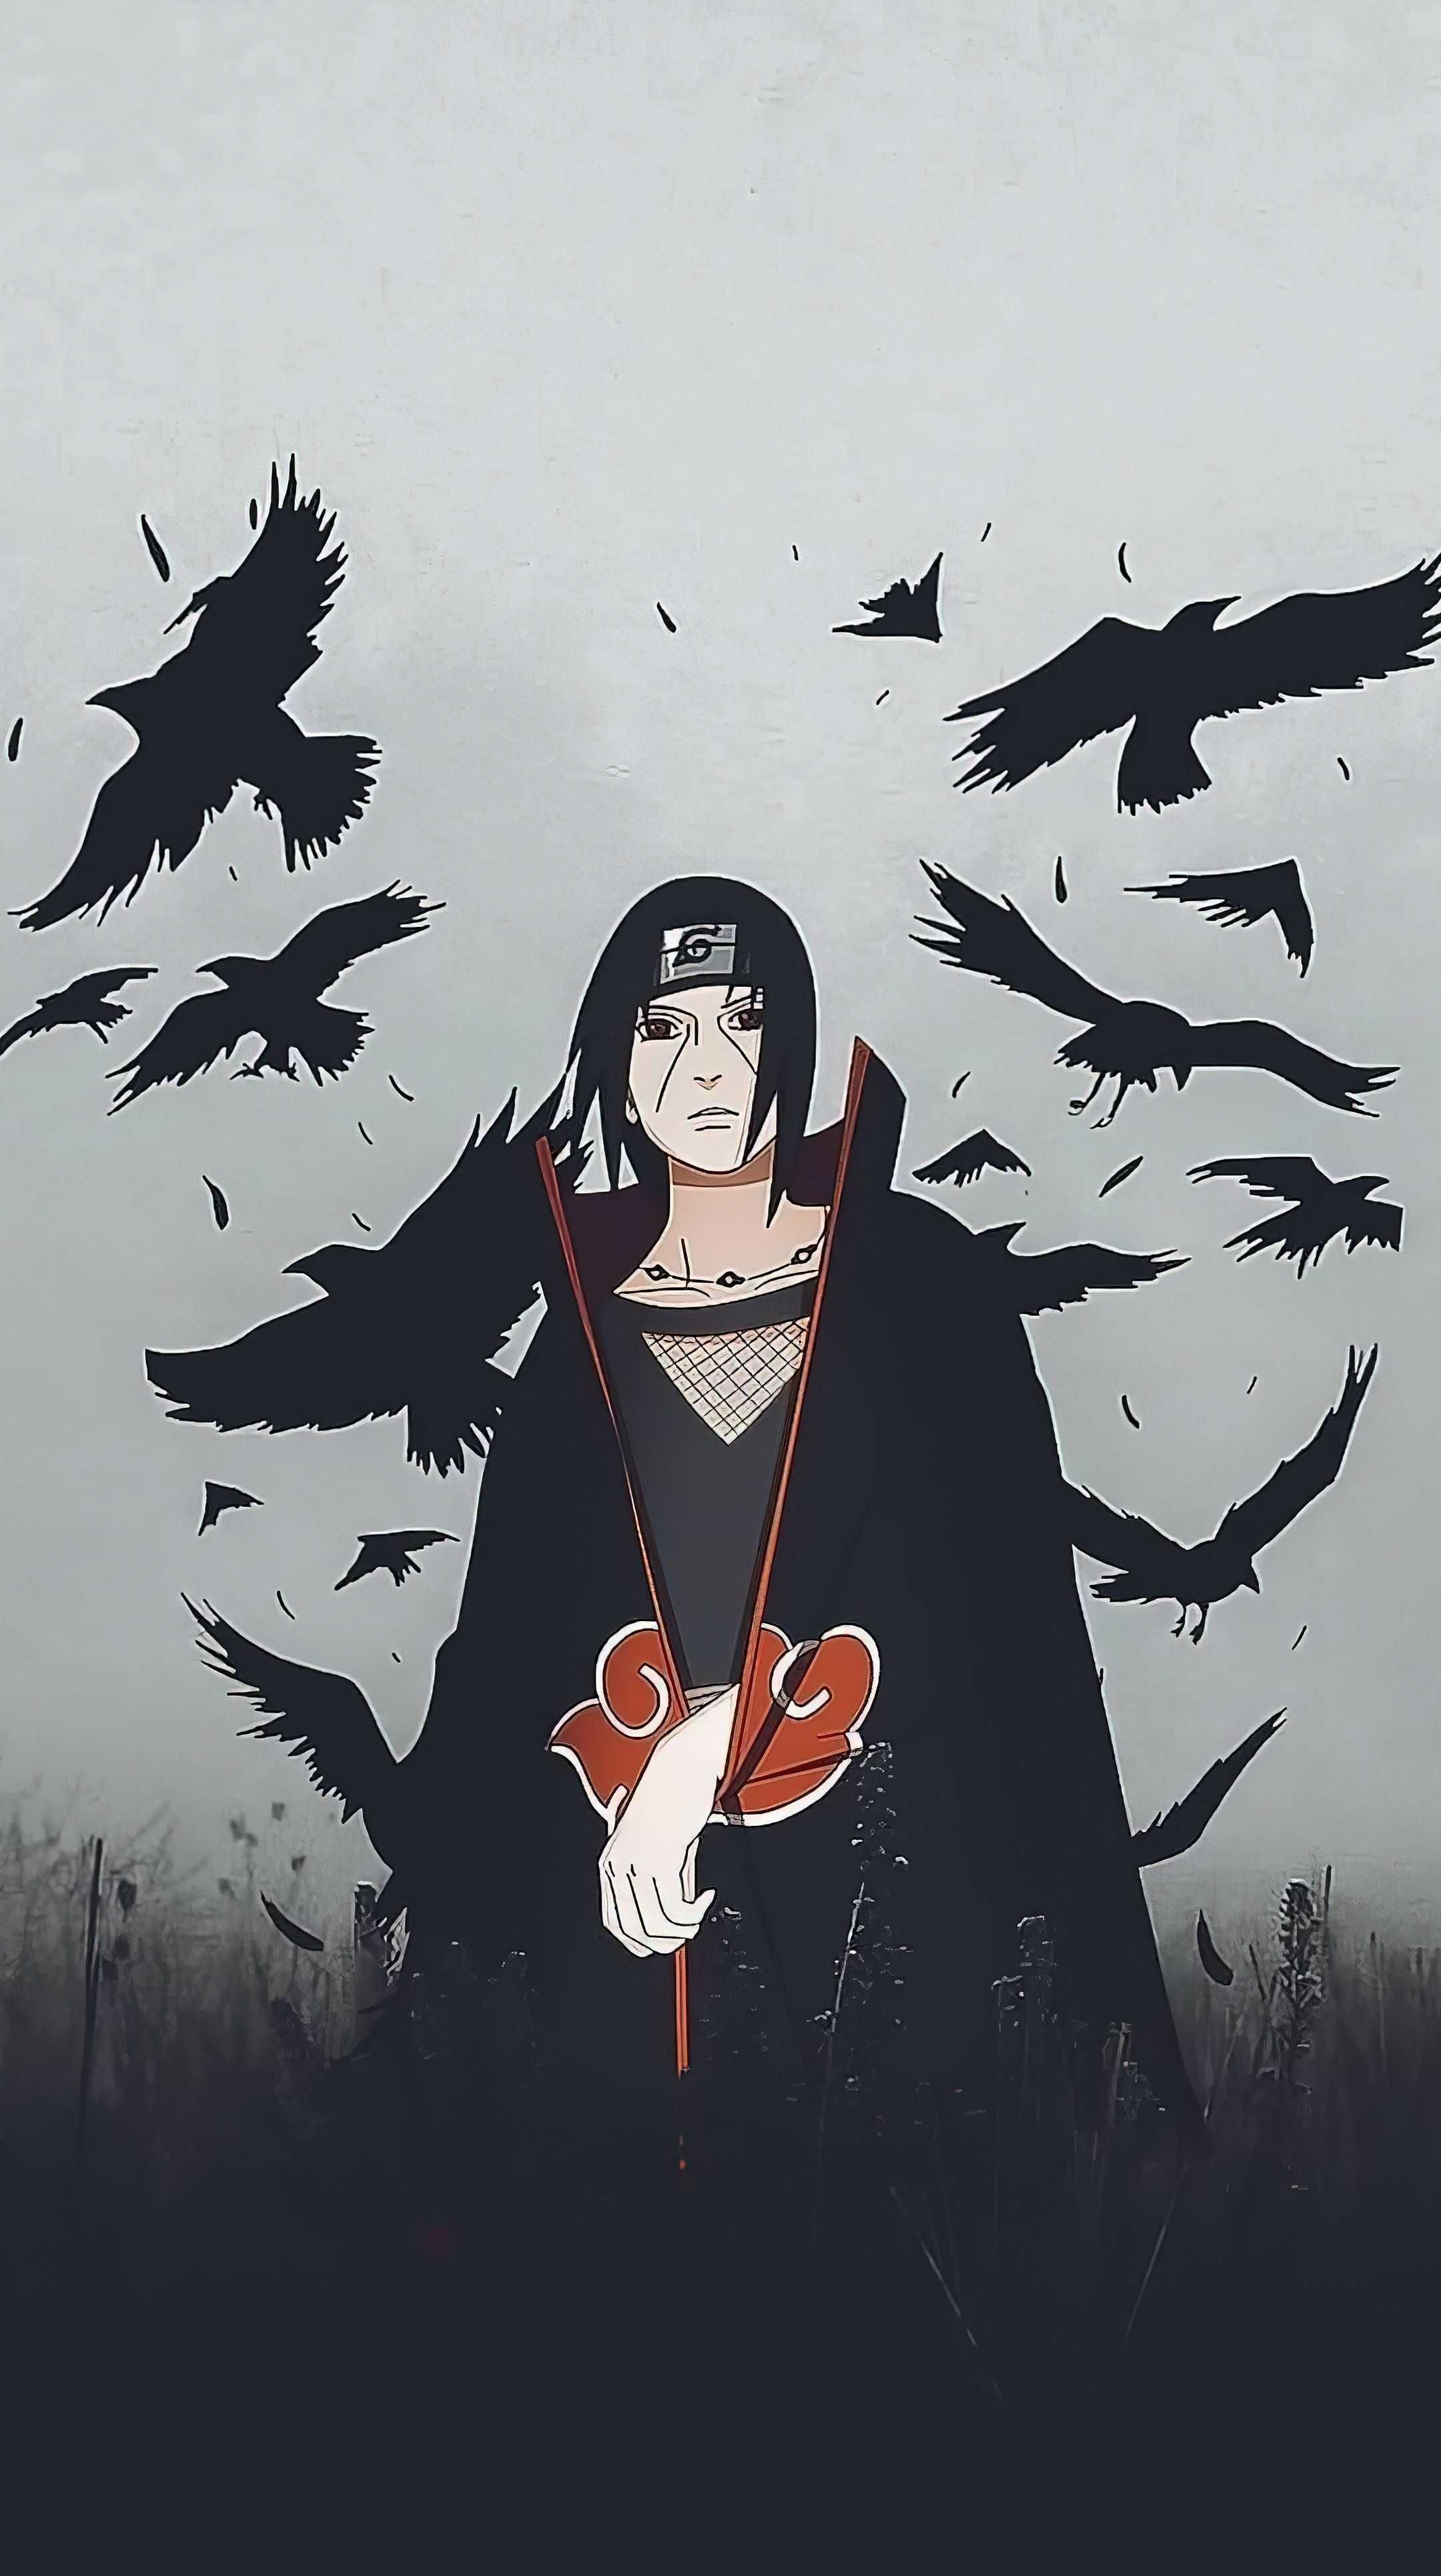 151+ Naruto Wallpapers HD for iPhone